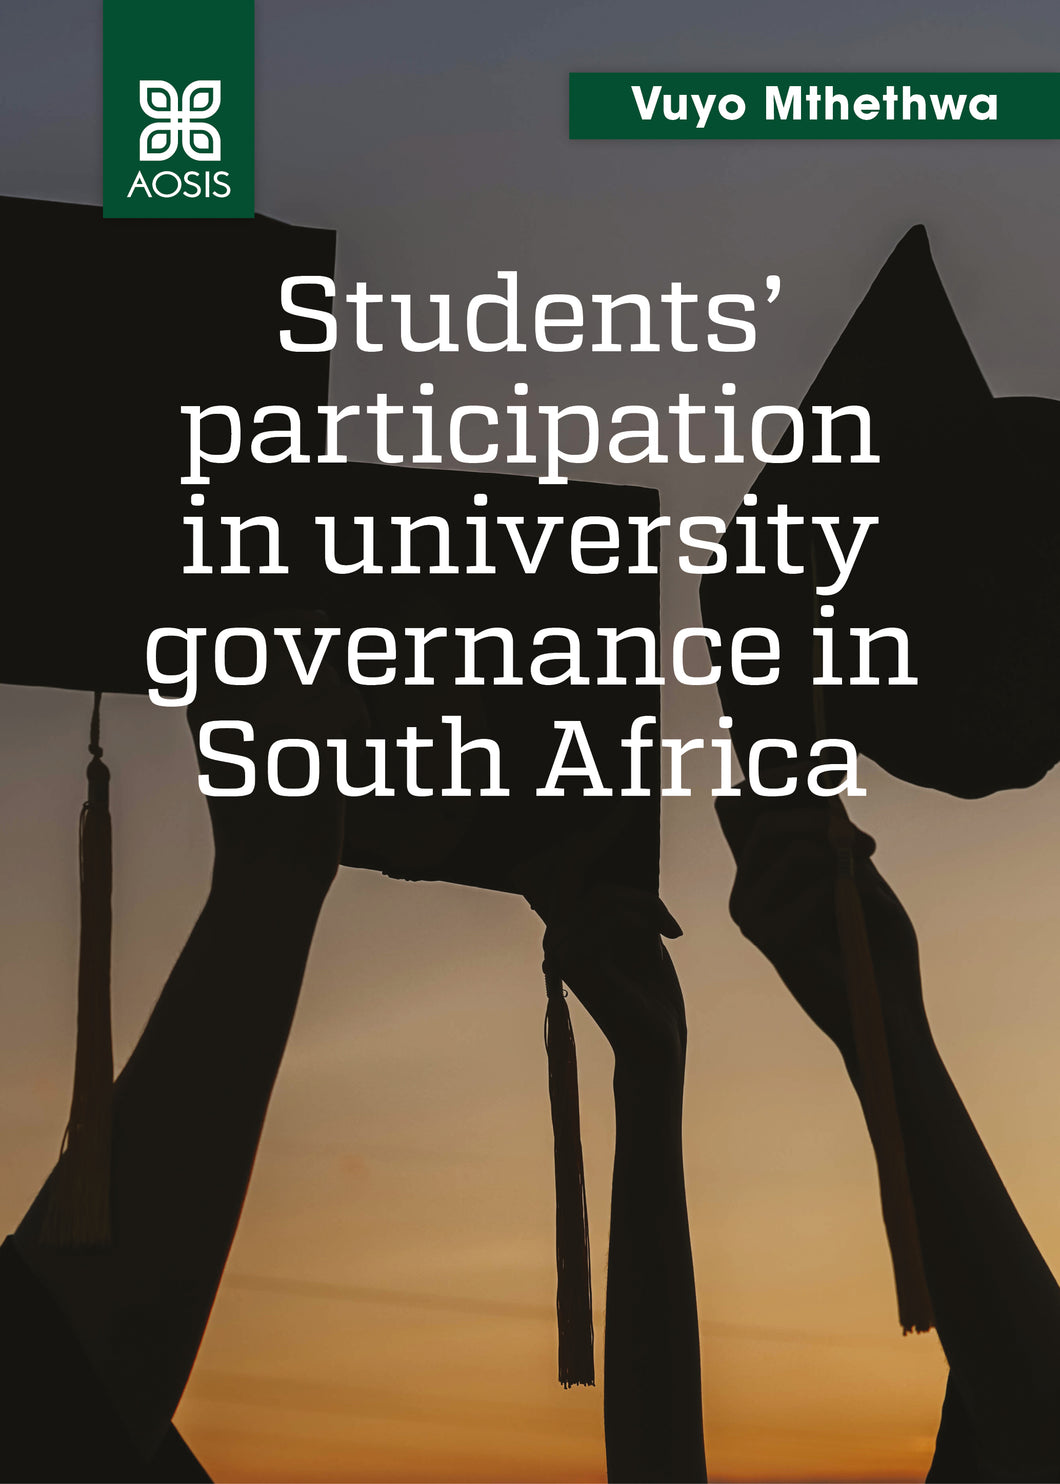 Students’ participation in university governance in South Africa